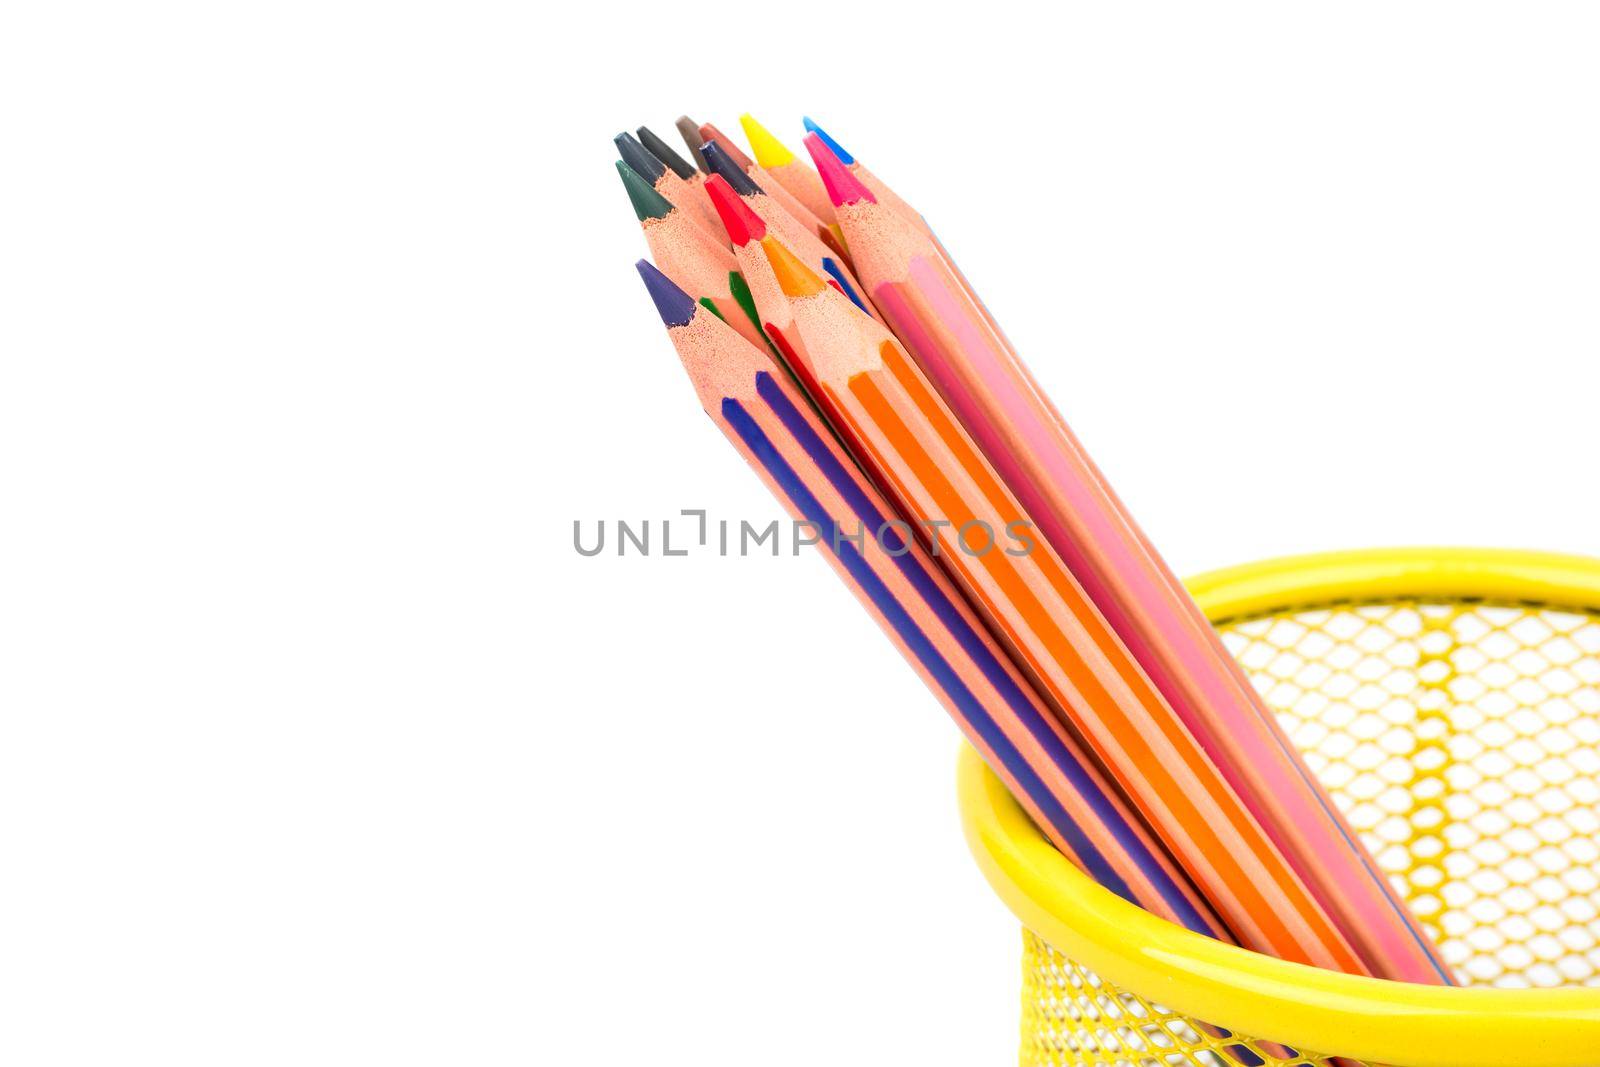 Colored pencils in a metal basket on white background